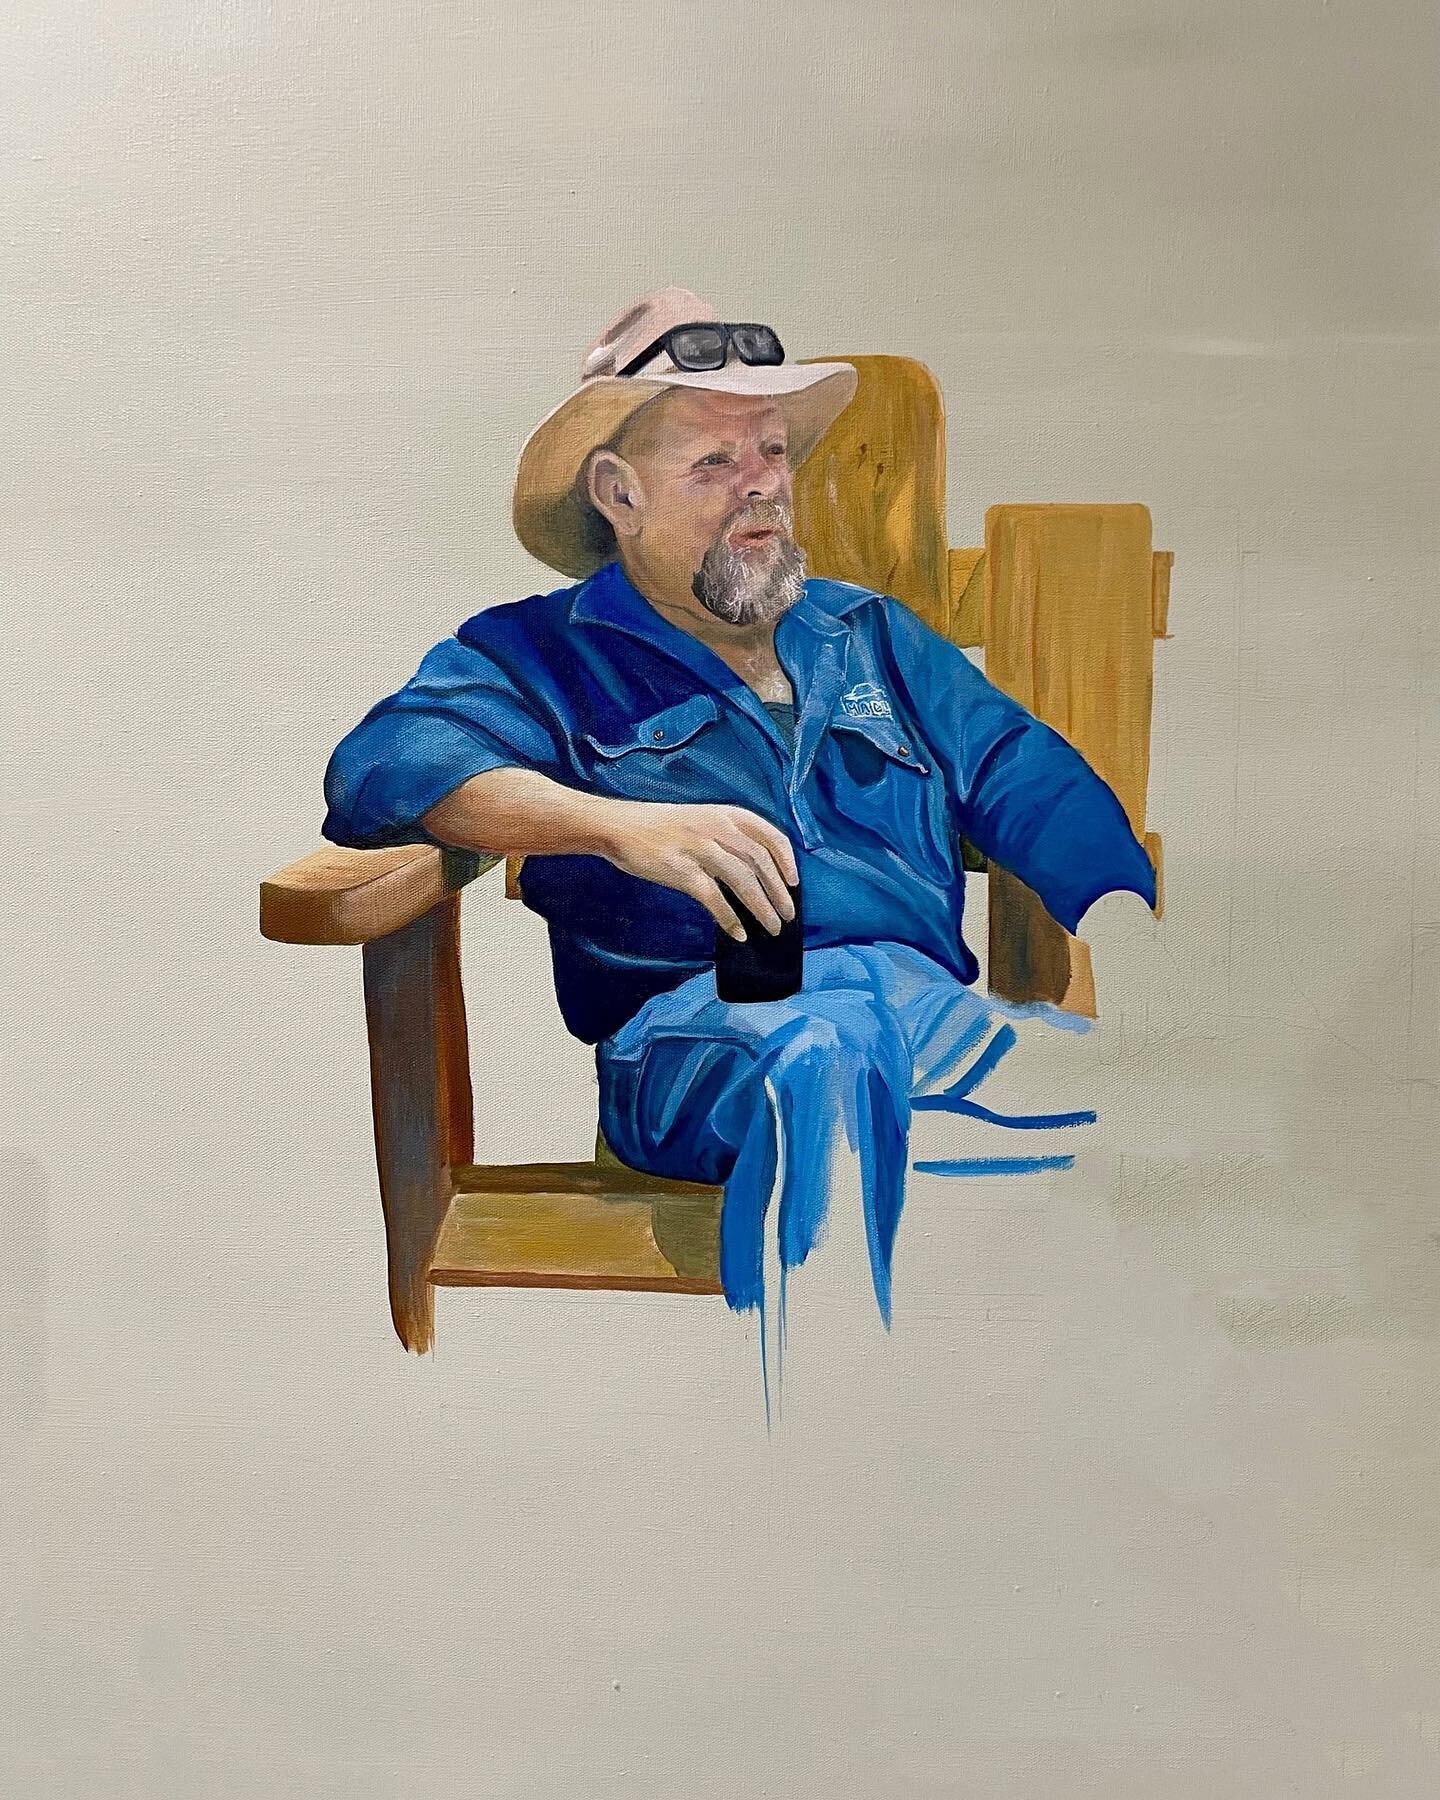 Gave @wheresmacca somewhere to sit and have a beer 🍻 

#wheresmacca #archibaldprize #wip #workinprogress #aussie #downunder #whatsupdownunder #channel10 #wranglerwestern #painting #portraitpainting #figurepainting #figurativepainting #portrait #port